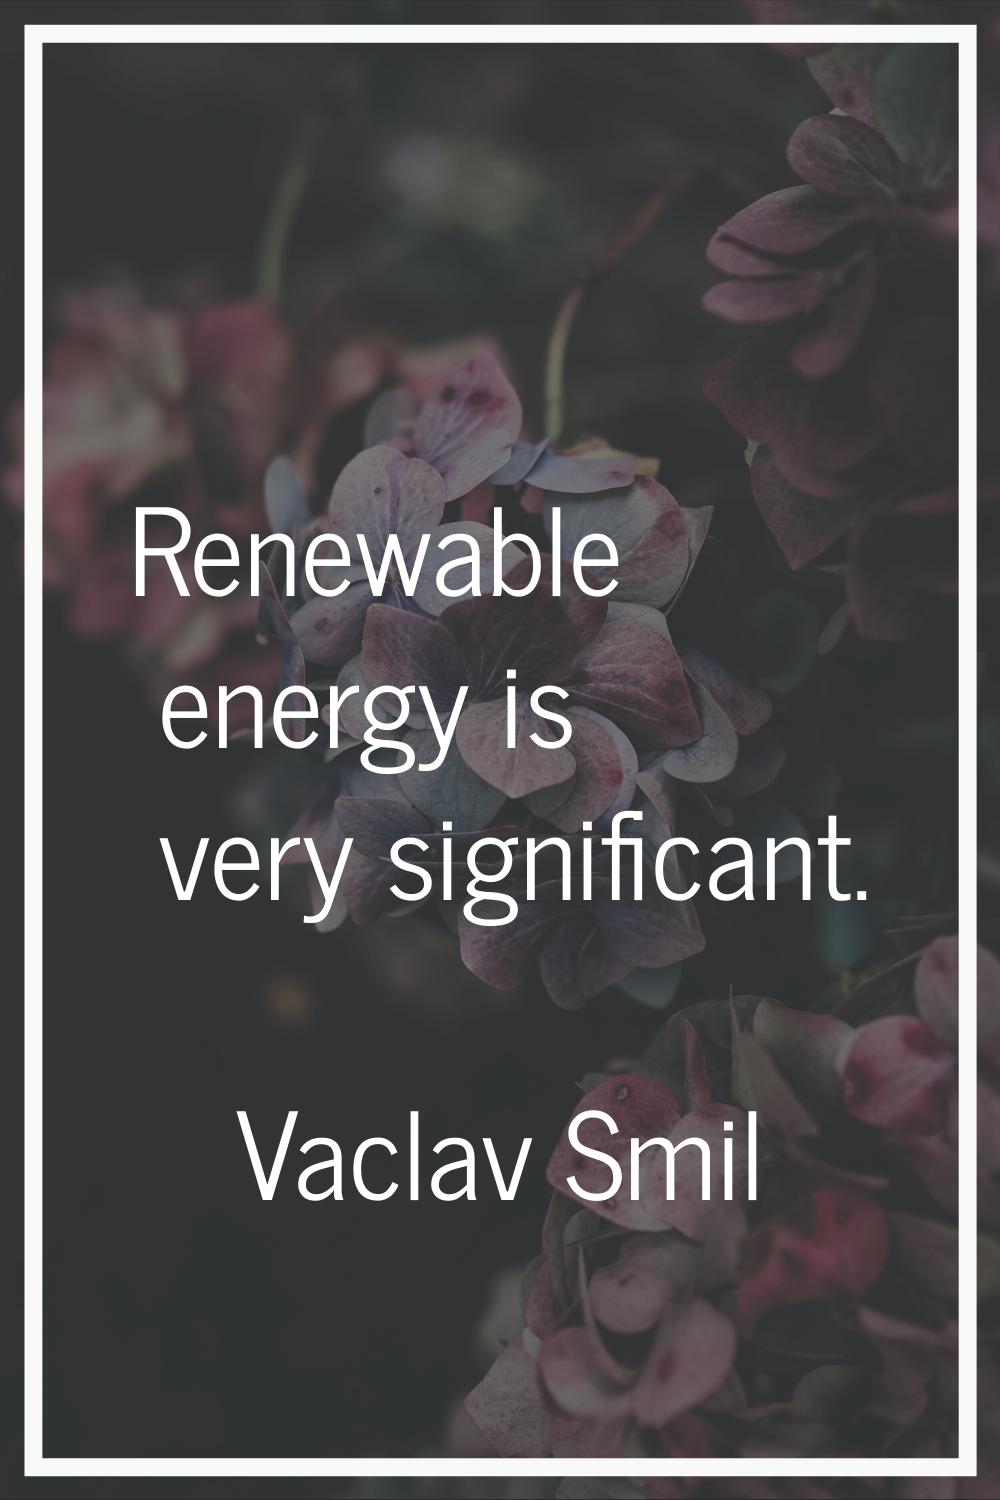 Renewable energy is very significant.